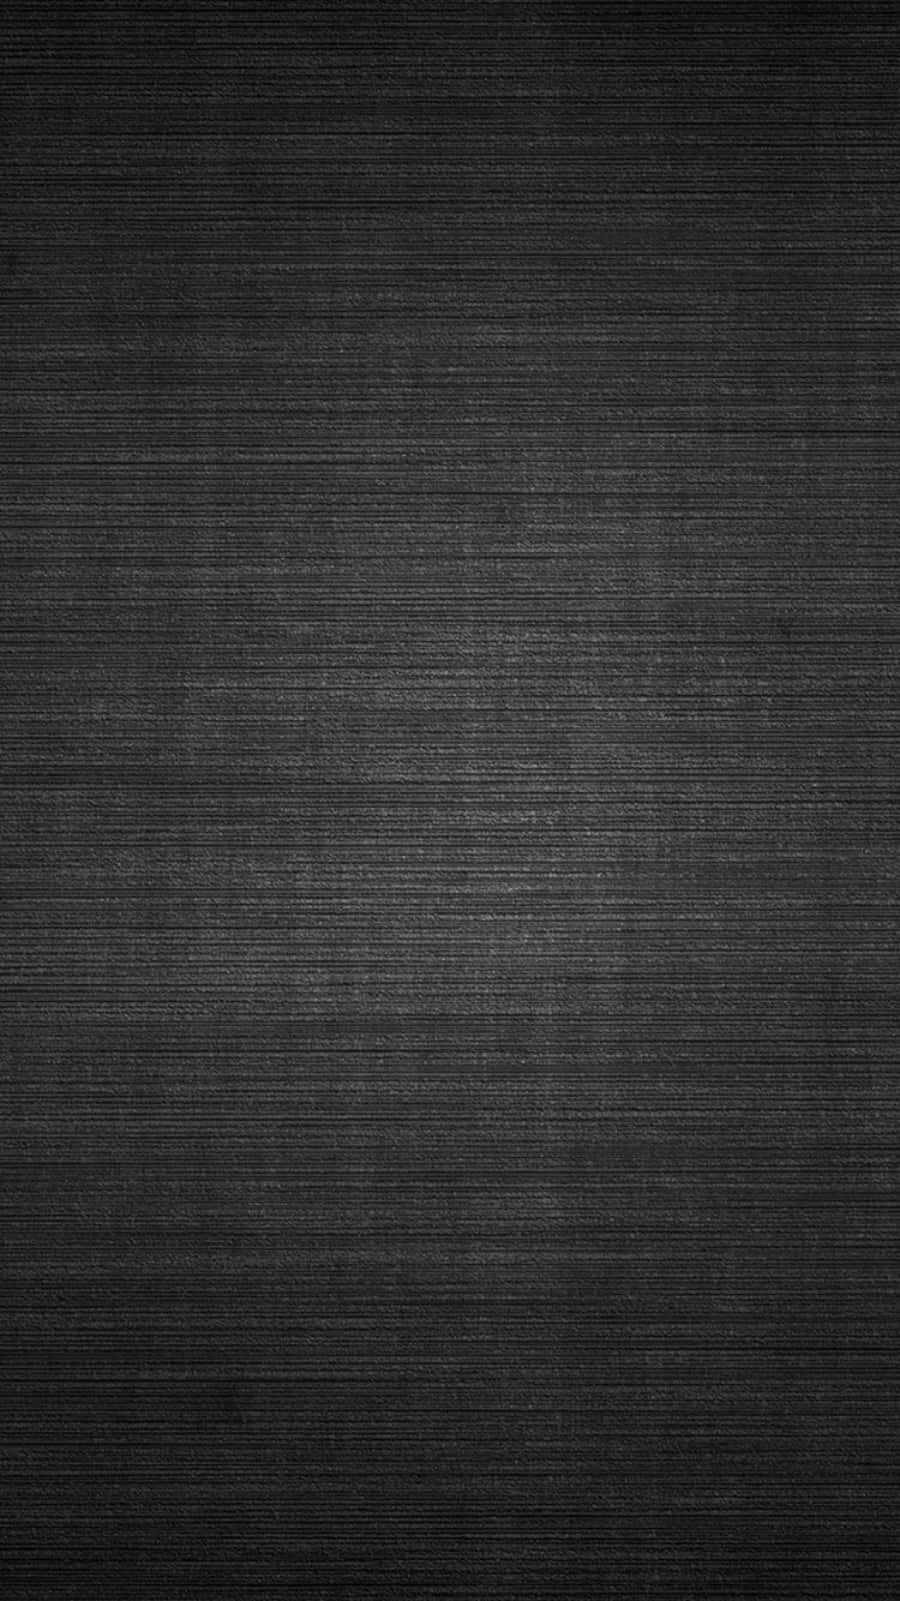 Textured Black And Gray Surface Wallpaper